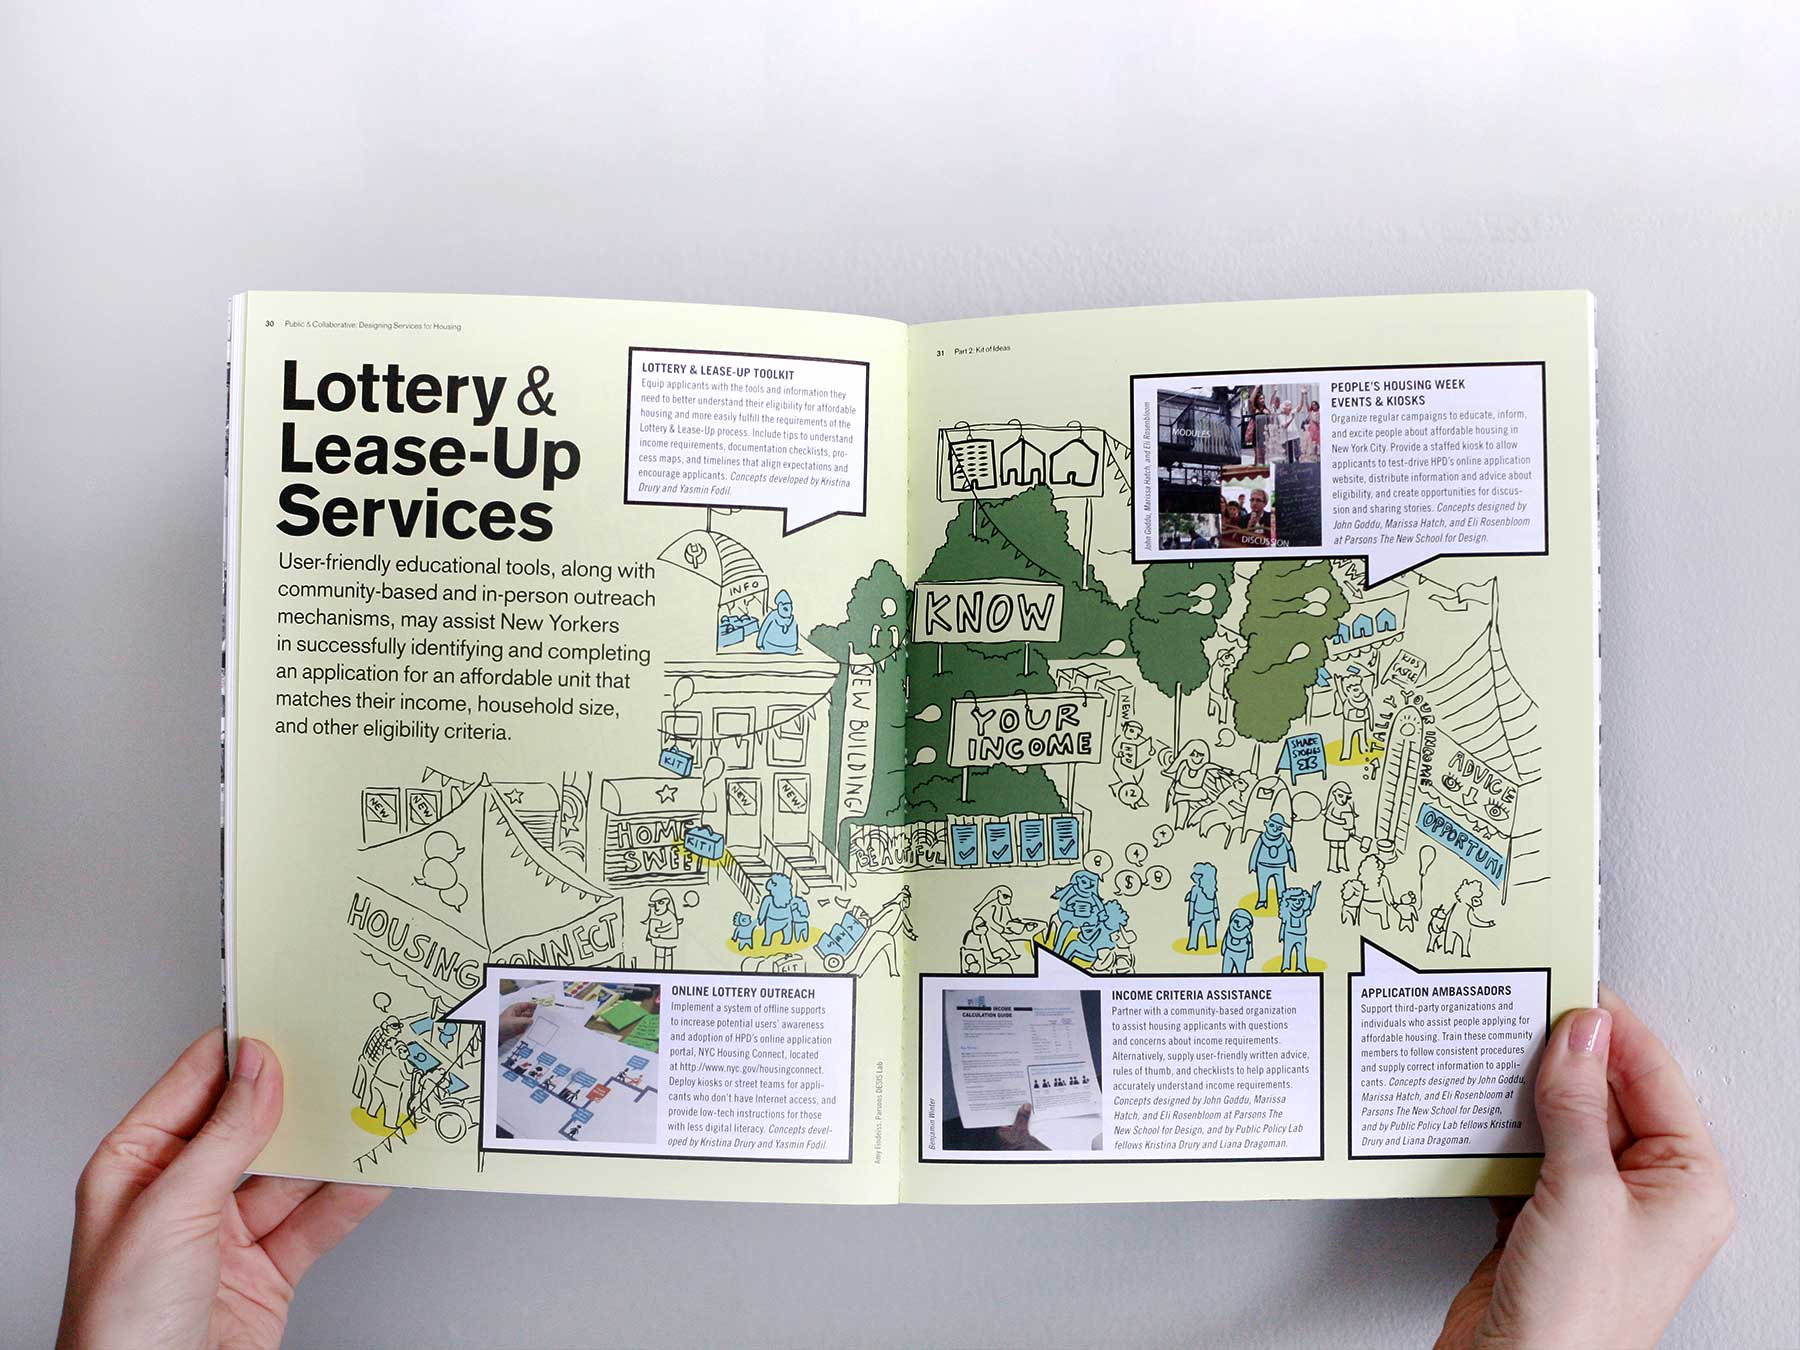 Two hands hold open a booklet explaining Lottery & Lease-Up Services for finding affordable housing.